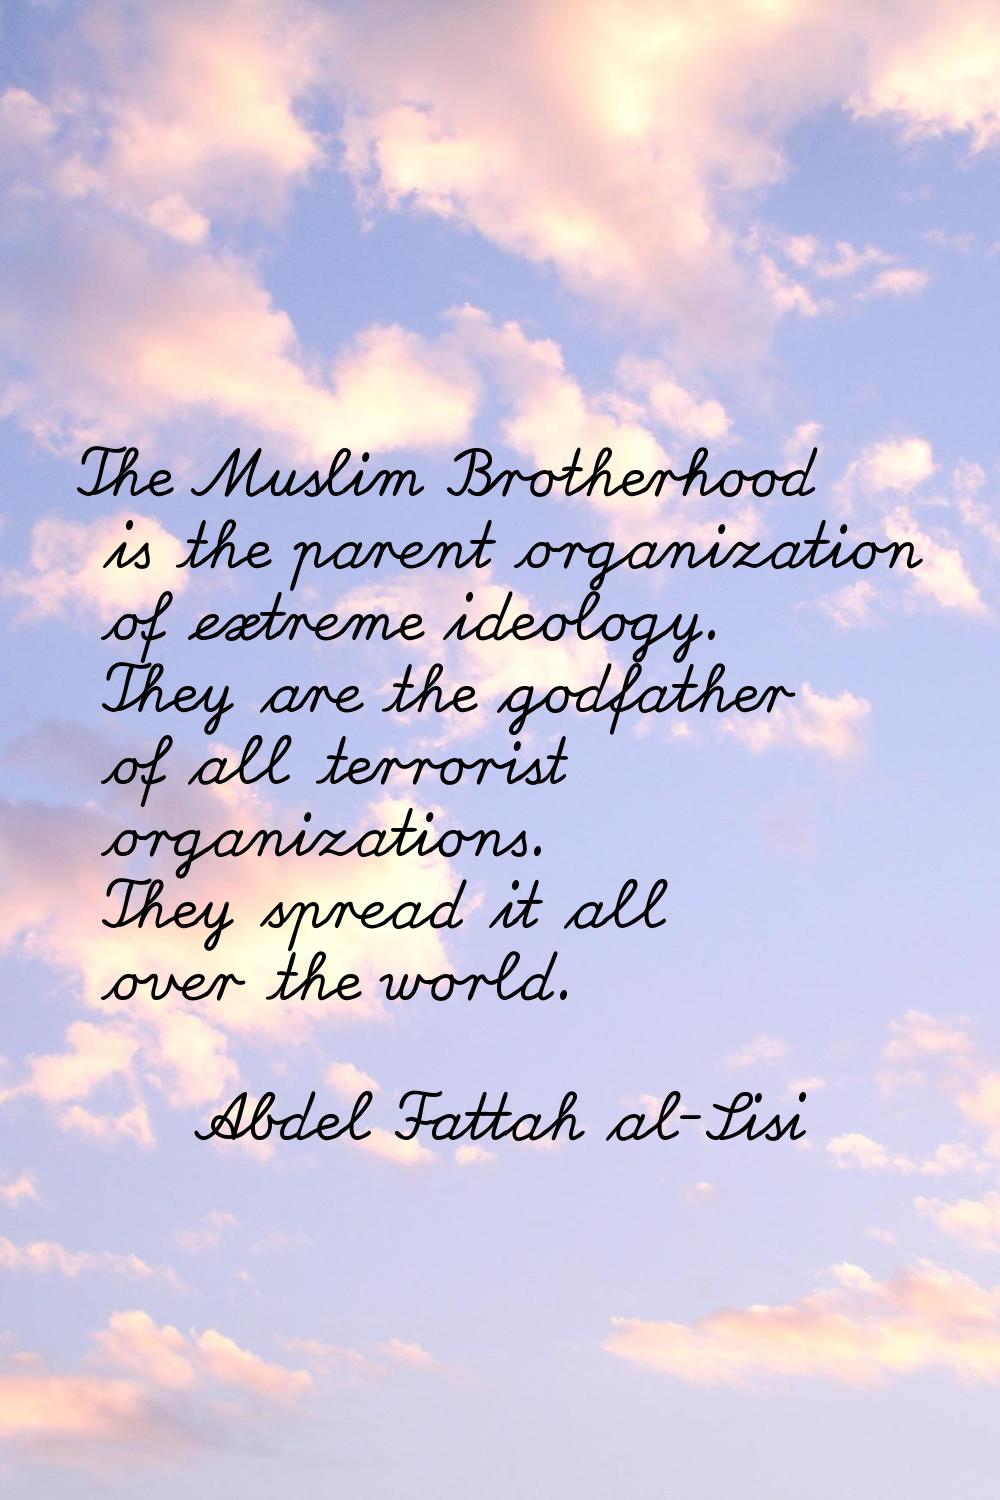 The Muslim Brotherhood is the parent organization of extreme ideology. They are the godfather of al